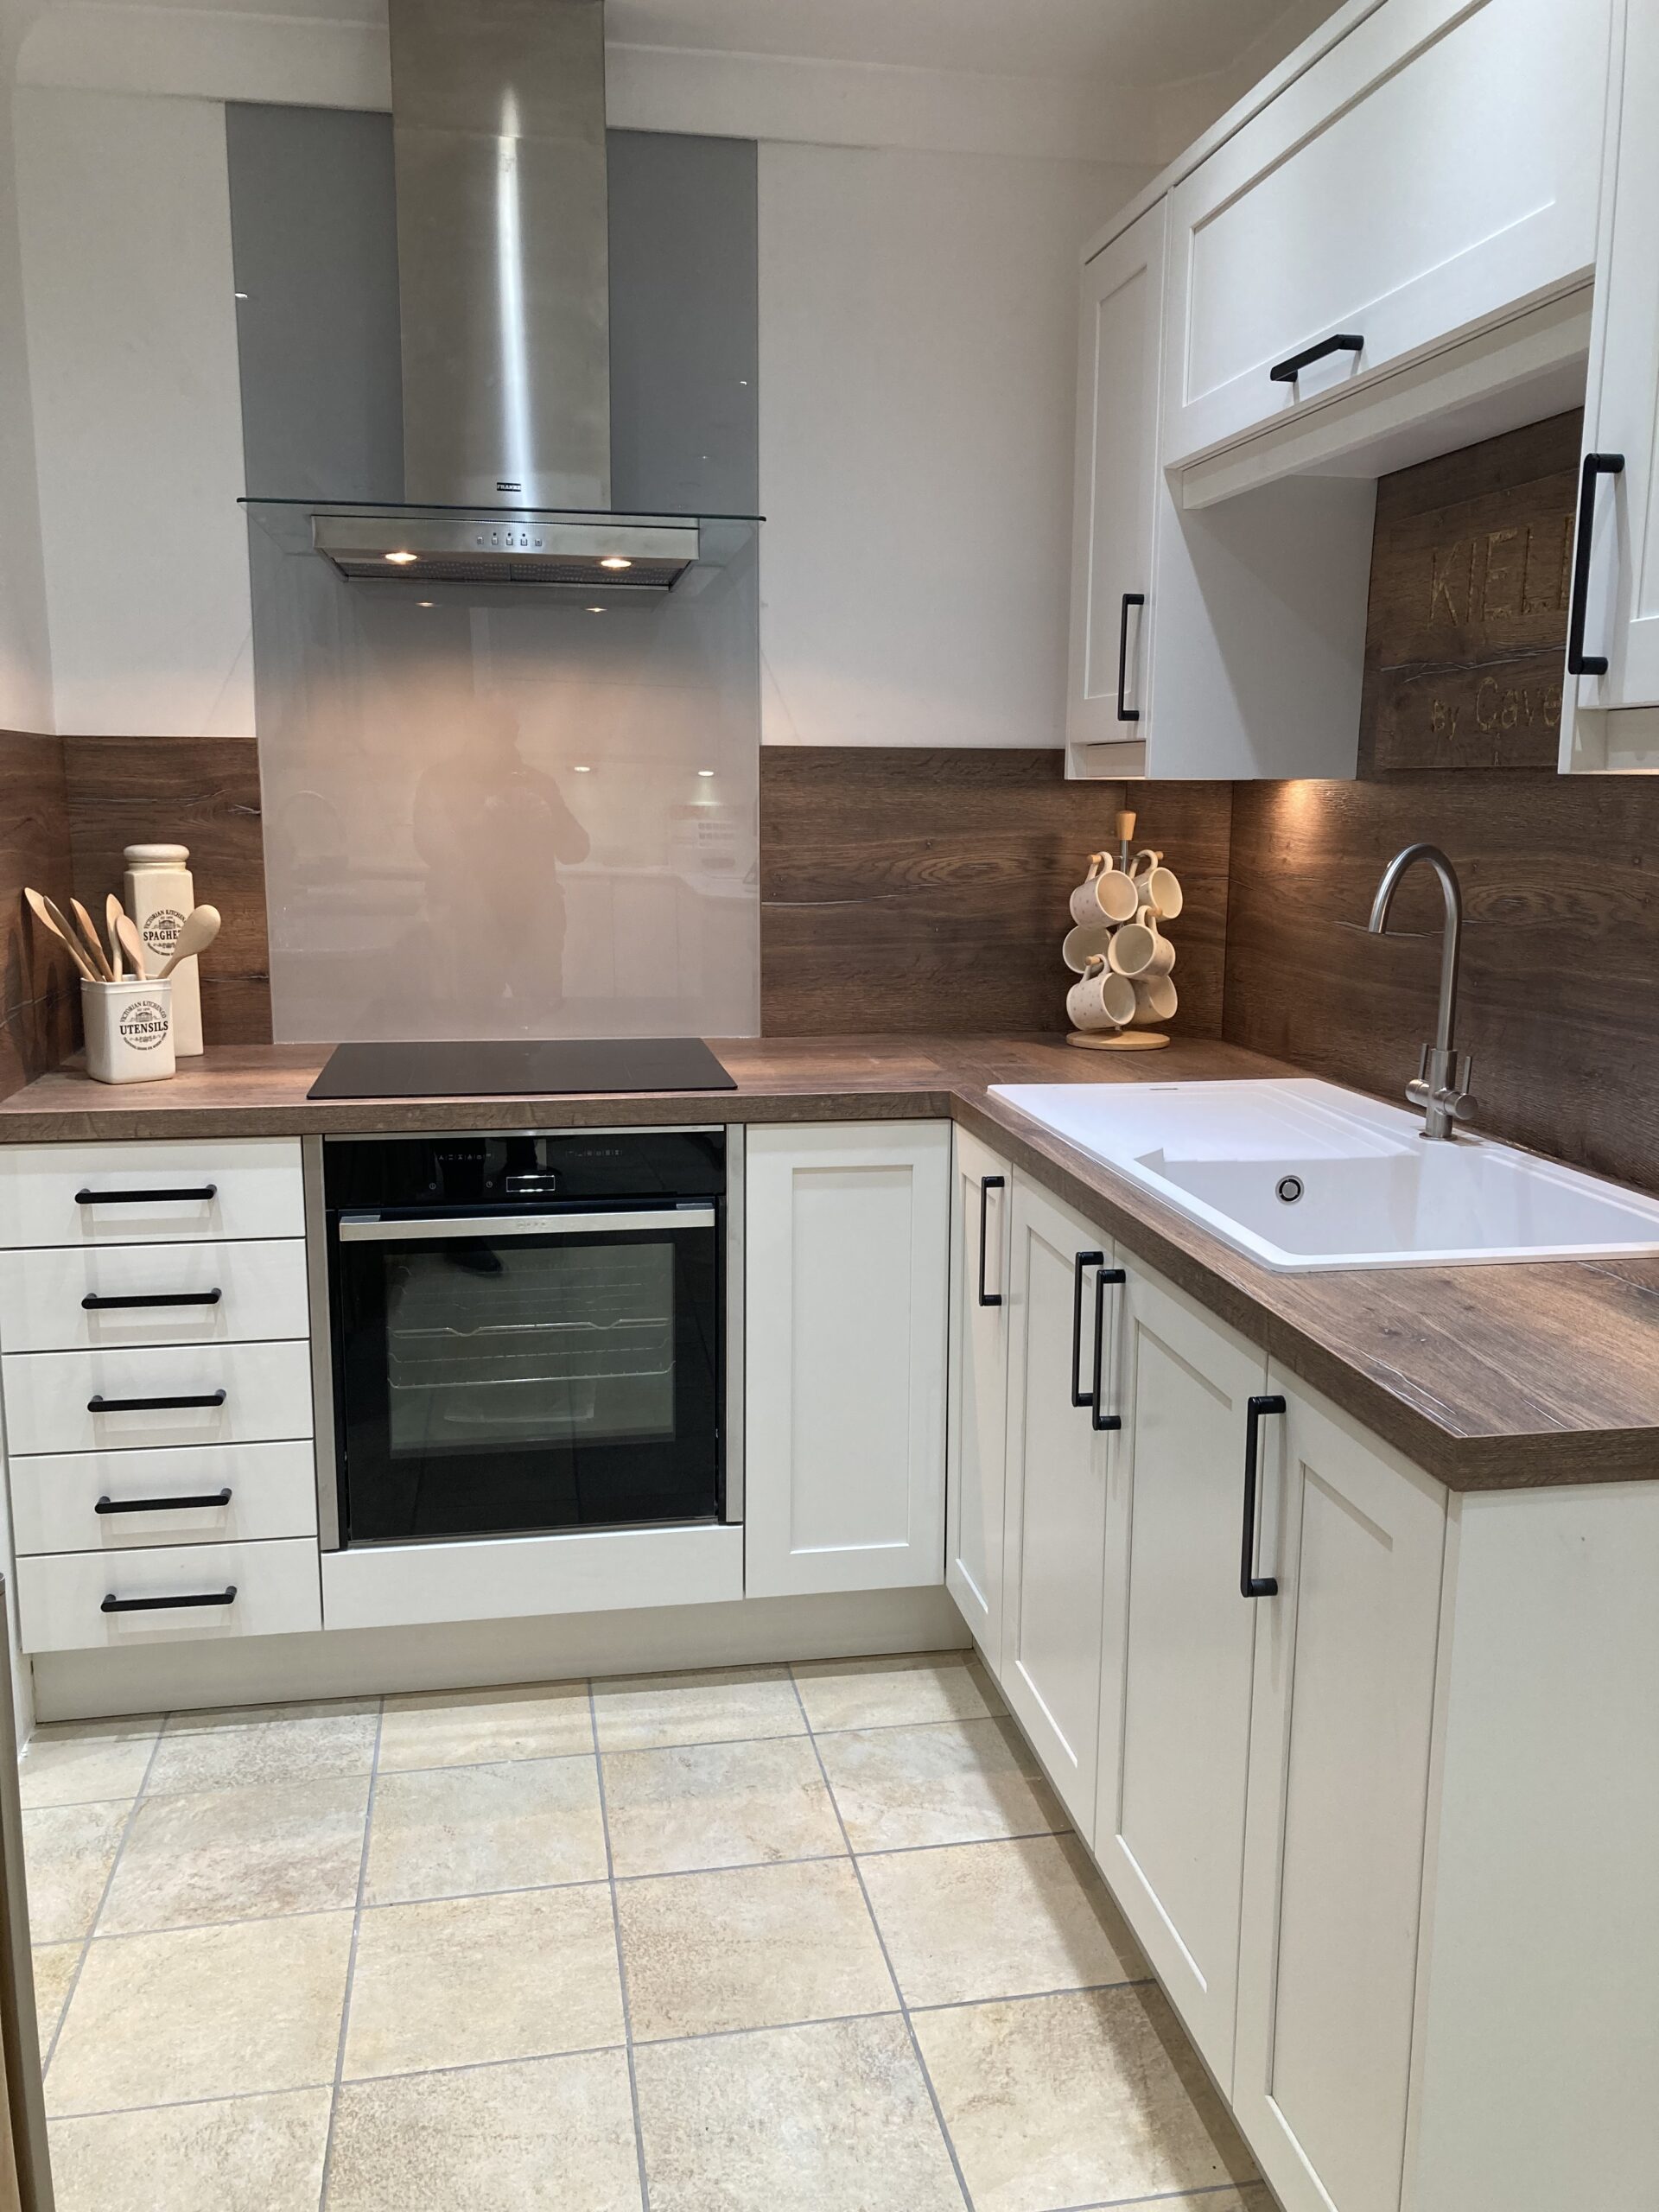 Cavendish kitchen featuring white painted shaker cabinet doors, wooden surfaces, a wood splashback, tiled floor, and an integrated sink.